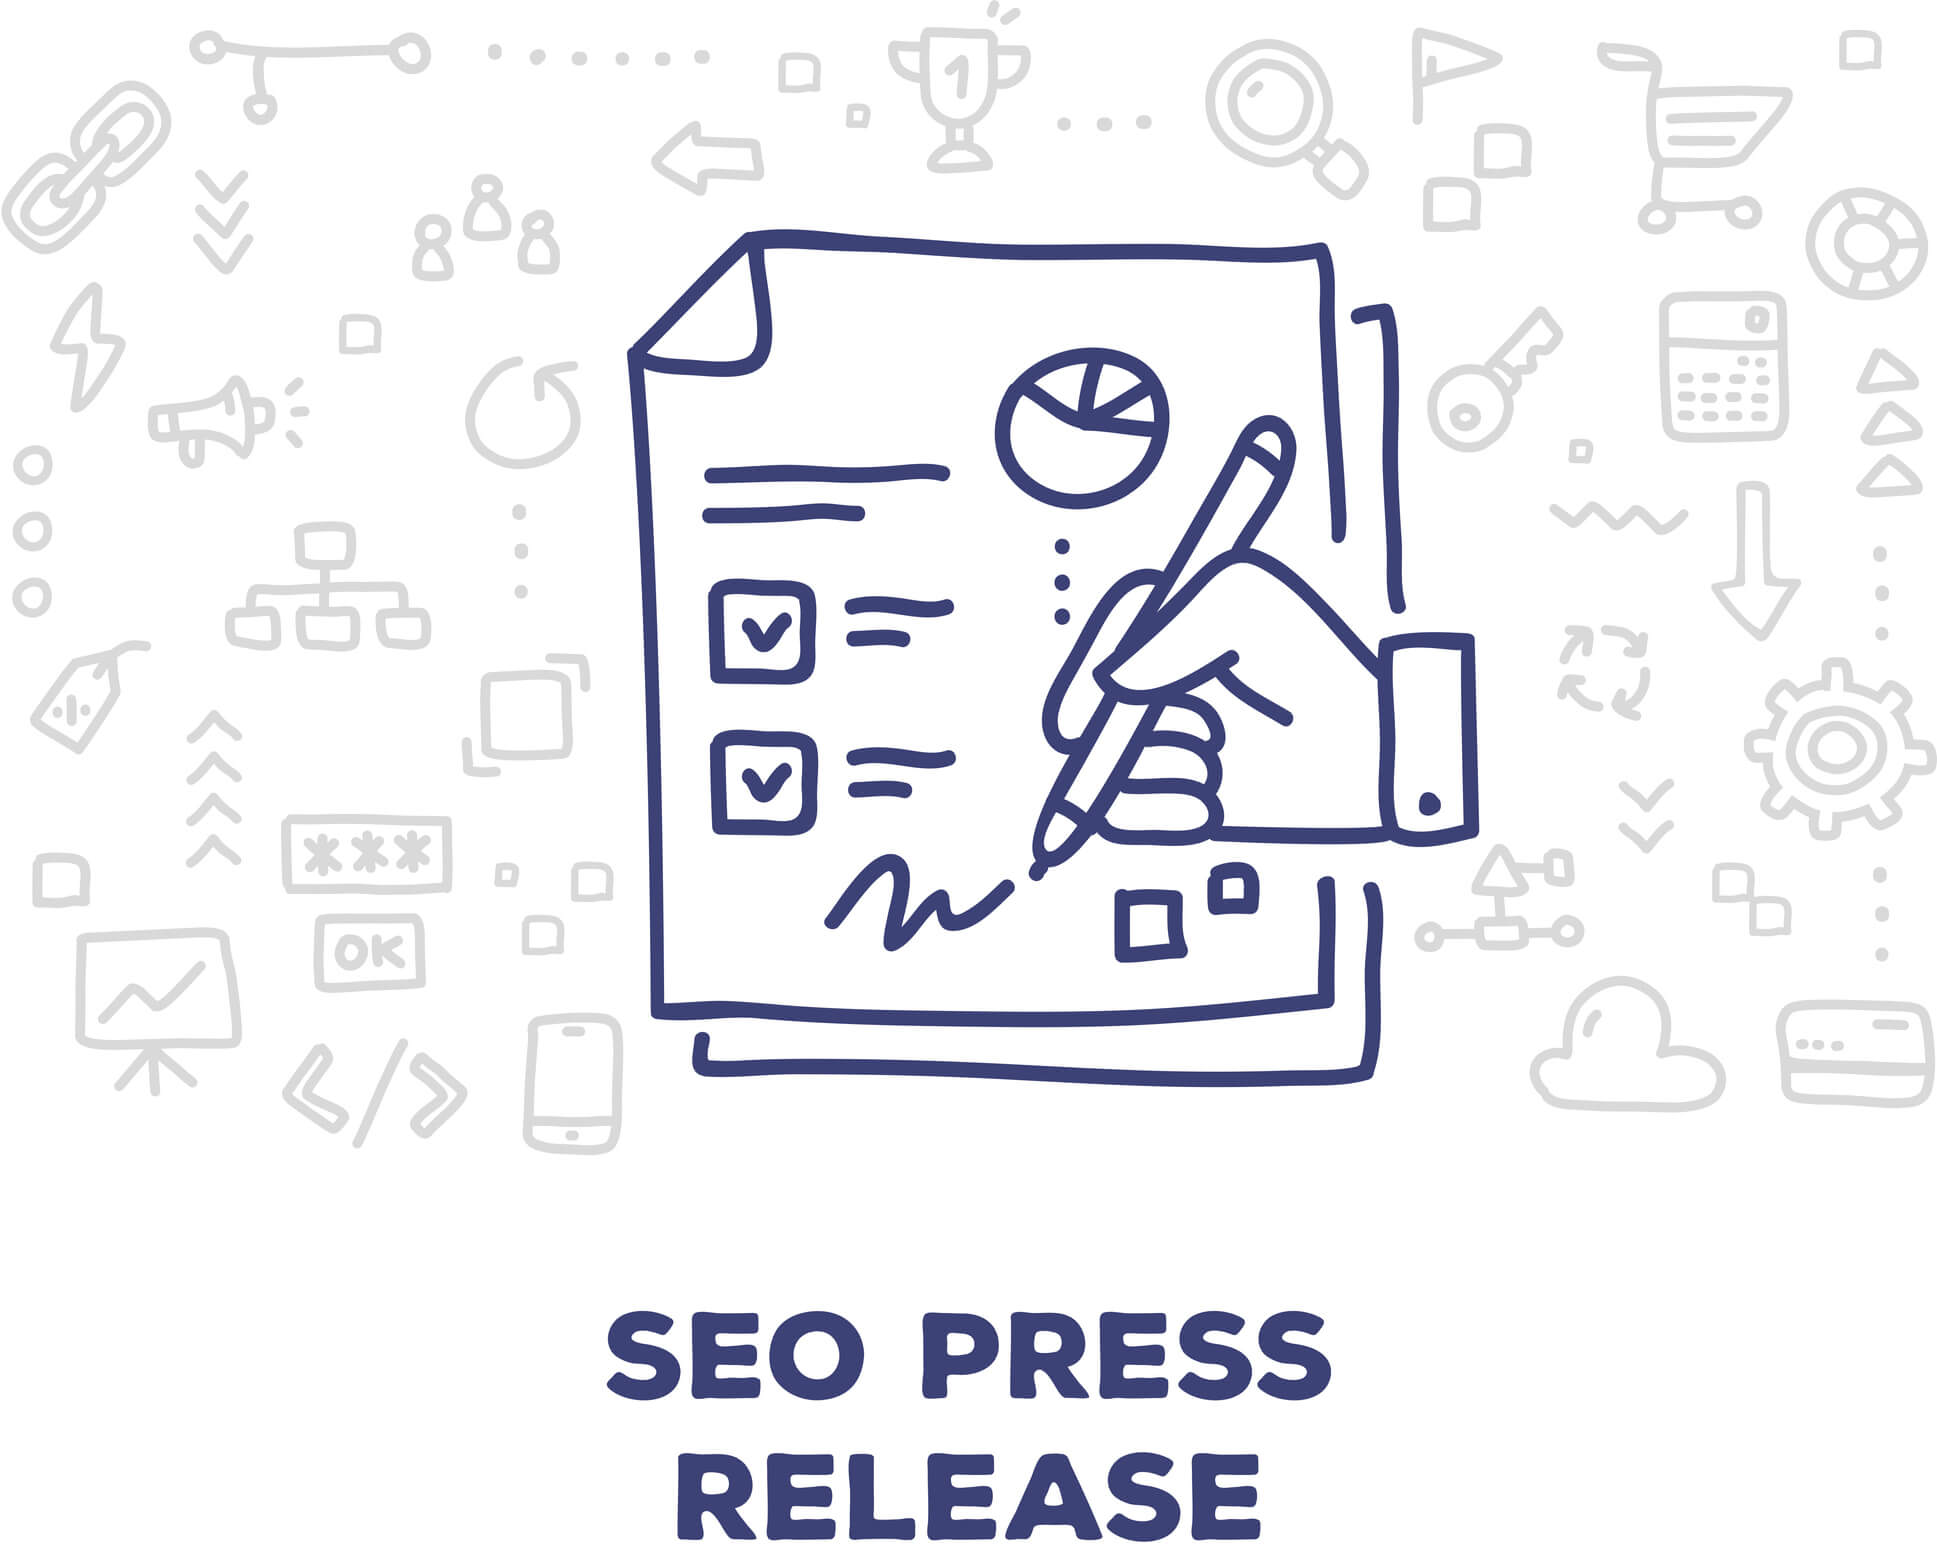  Press Releases for SEO